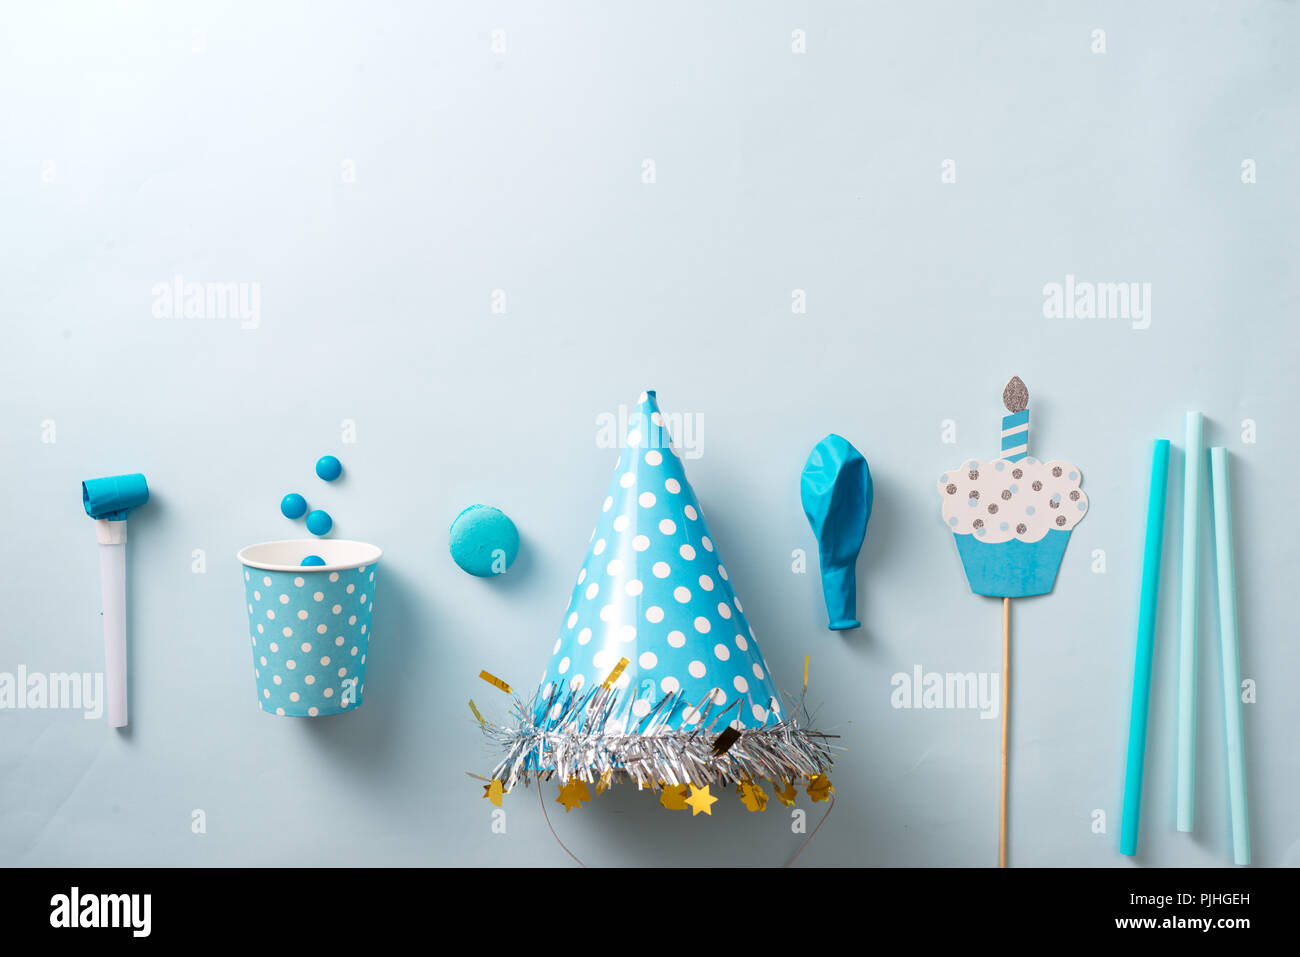 party, background, carnival, birthday, decoration, colorful, confetti, new, items, balloons, frame, happy, children, holiday, fun, celebration, celebr Stock Photo